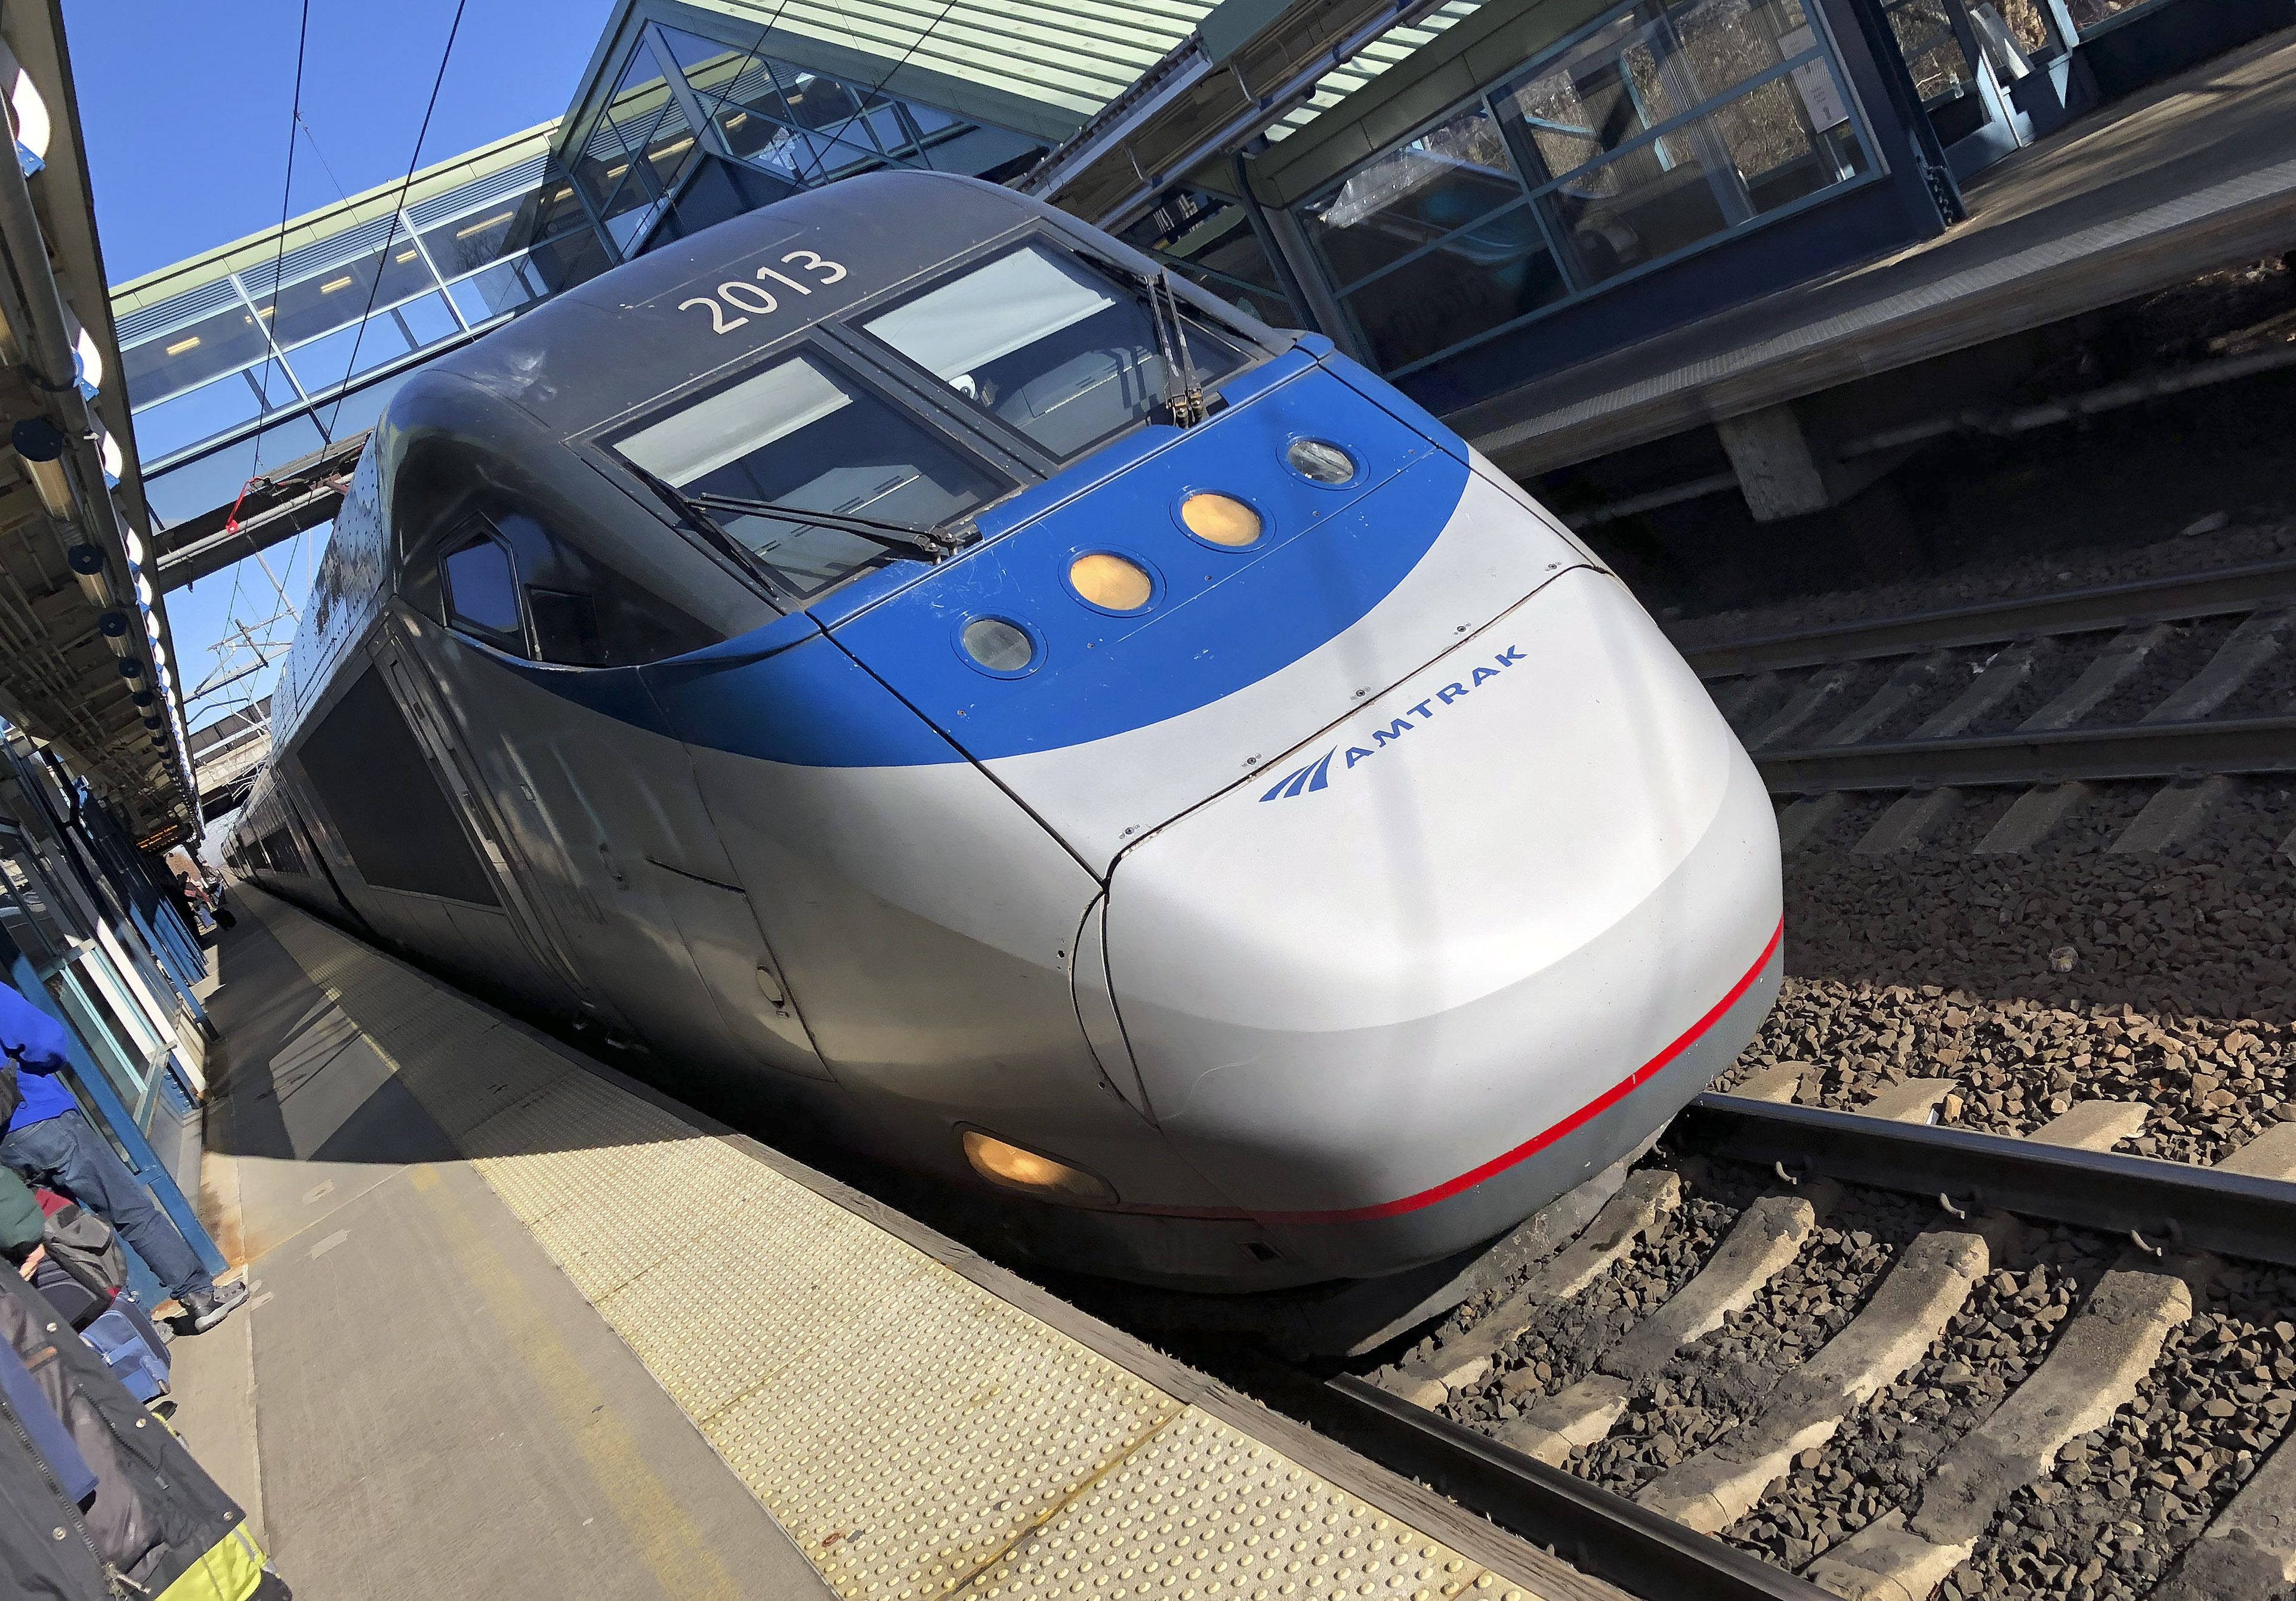 Petition · America needs a bullet train ·